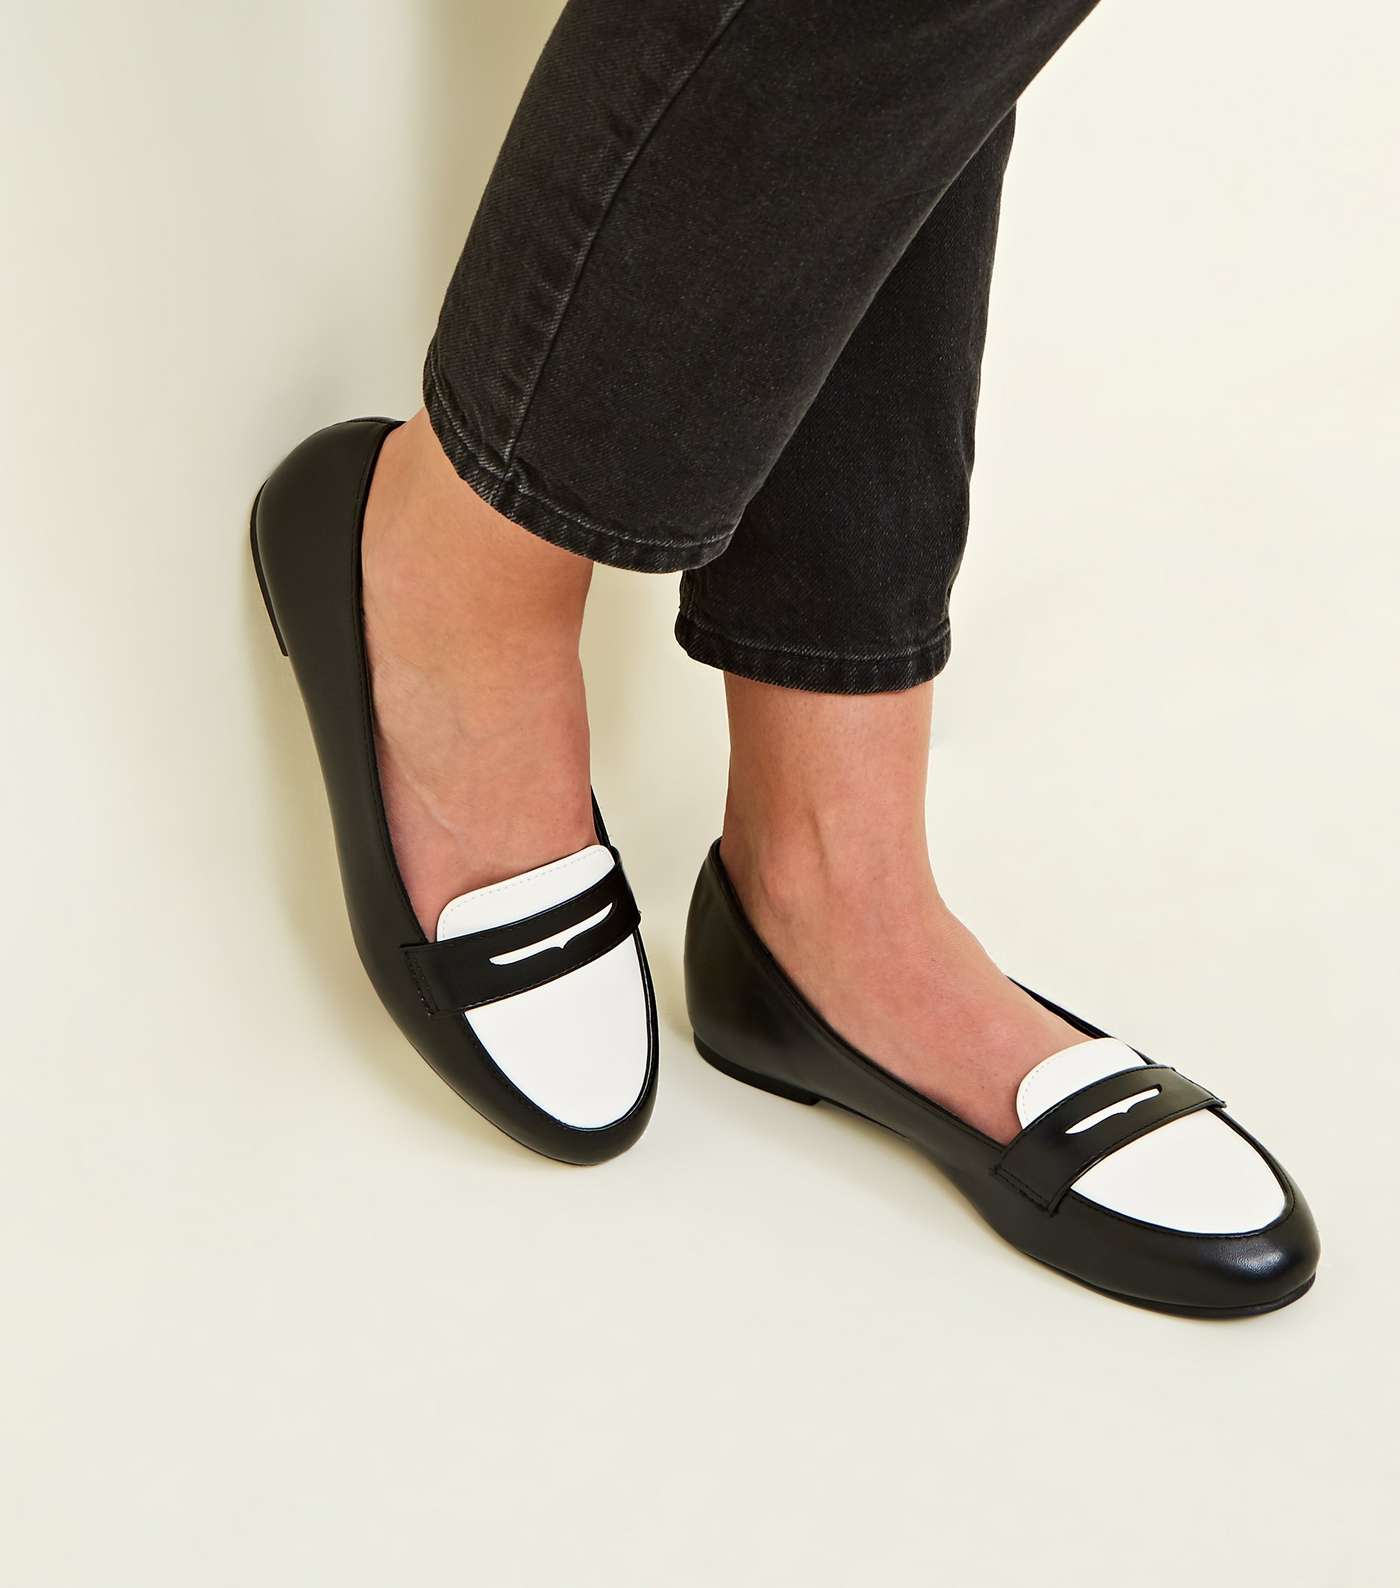 Monochrome Leather-Look Penny Loafers Image 2